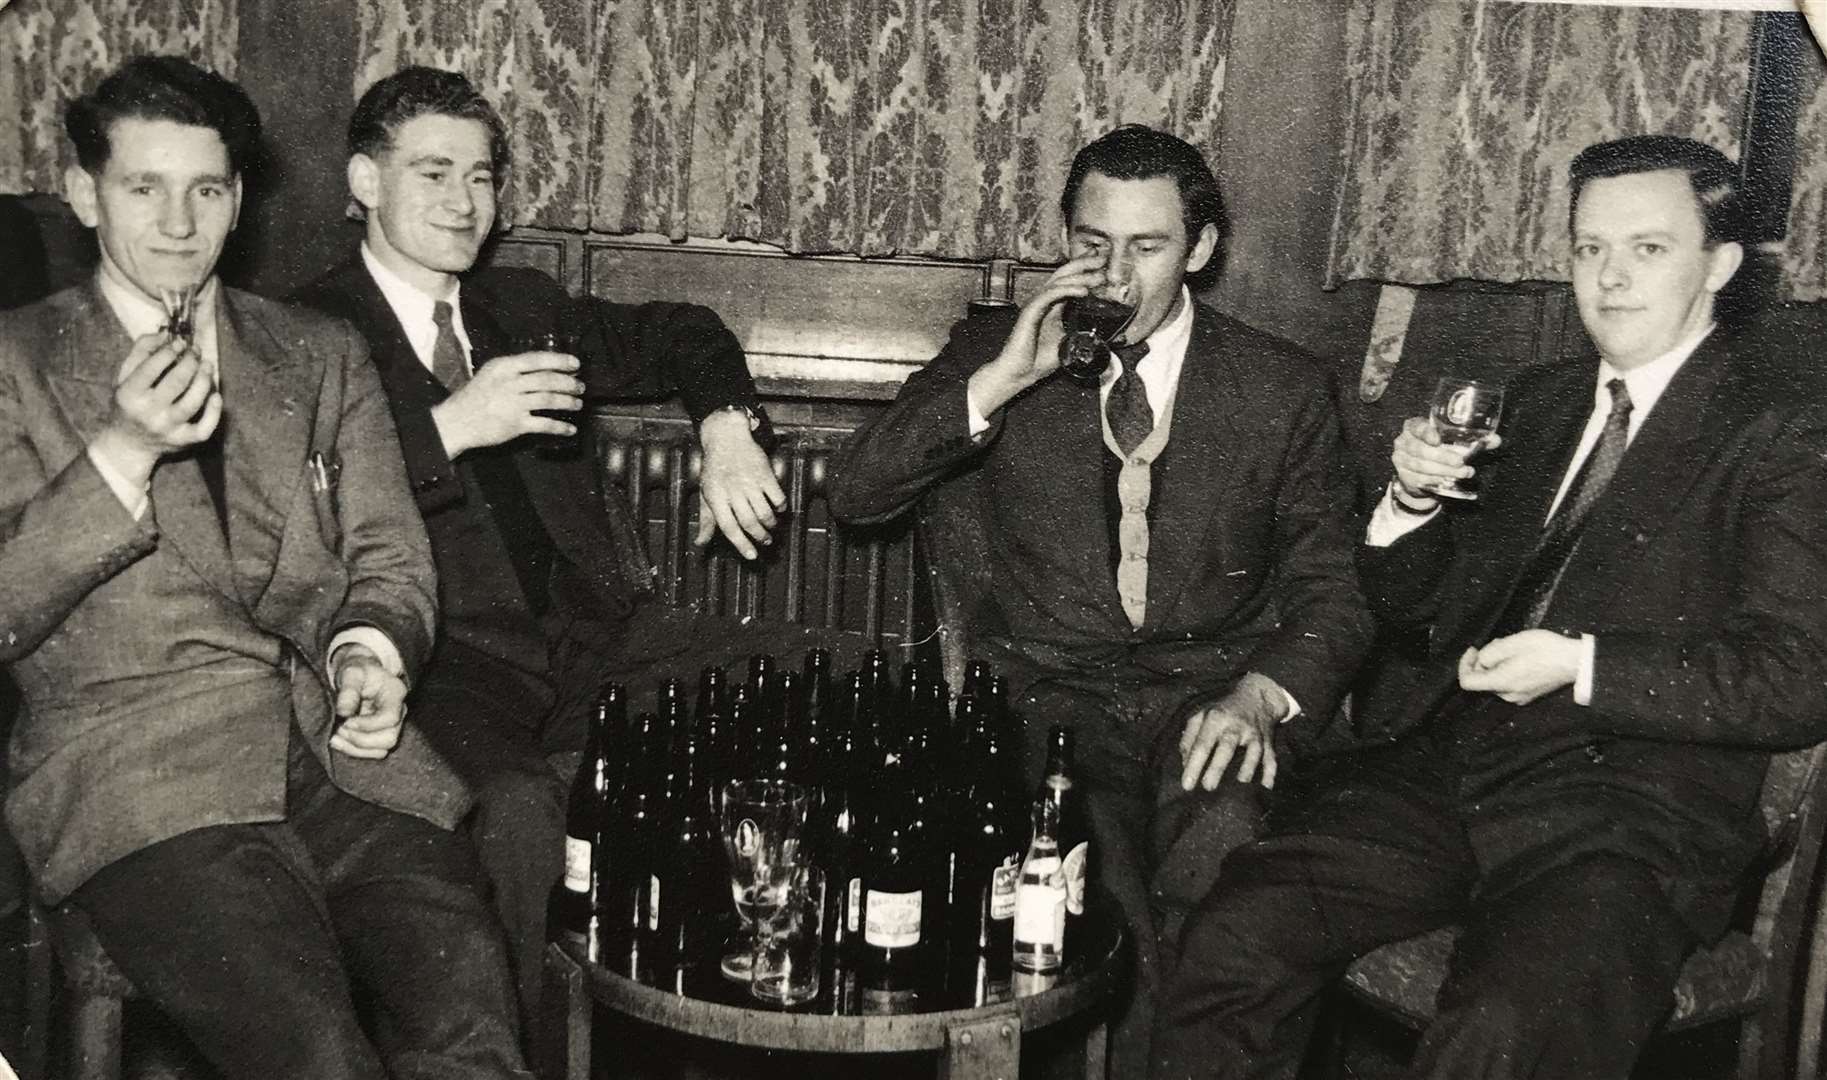 Peter Newman on the right relaxing with pals, his chum Mike is two along from him